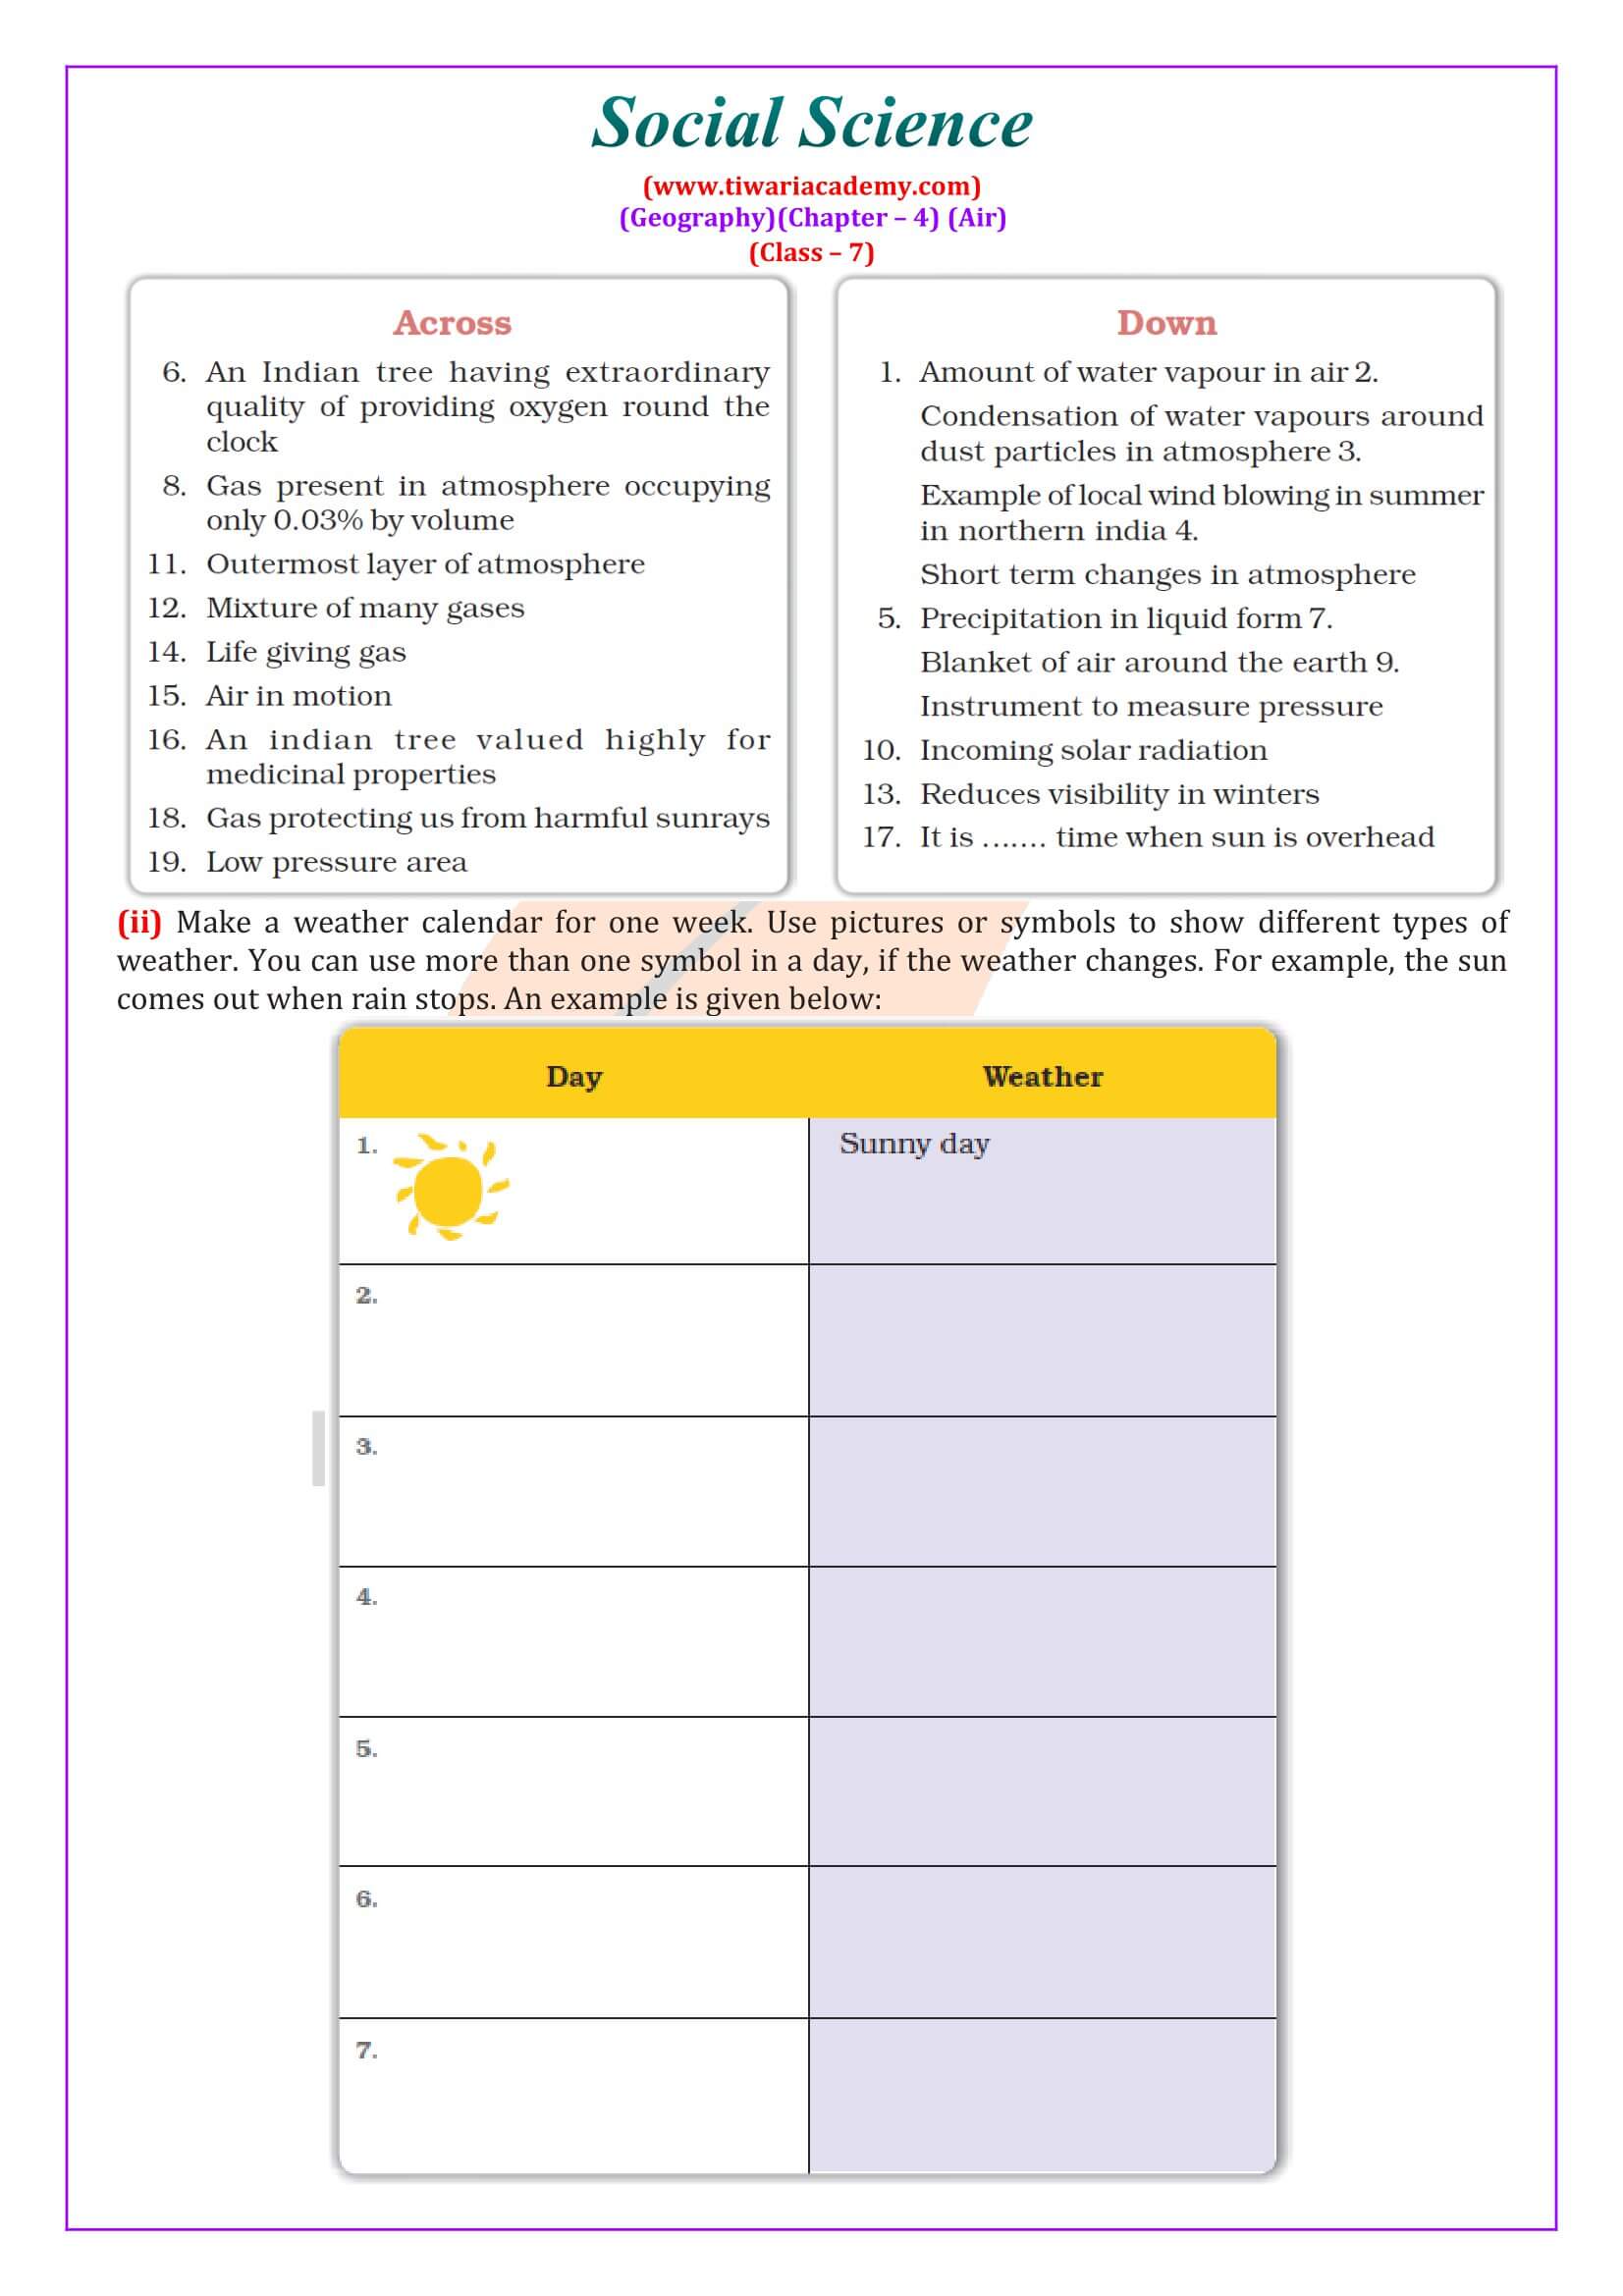 Class 7 Social Science Geography Chapter 4 Solutions